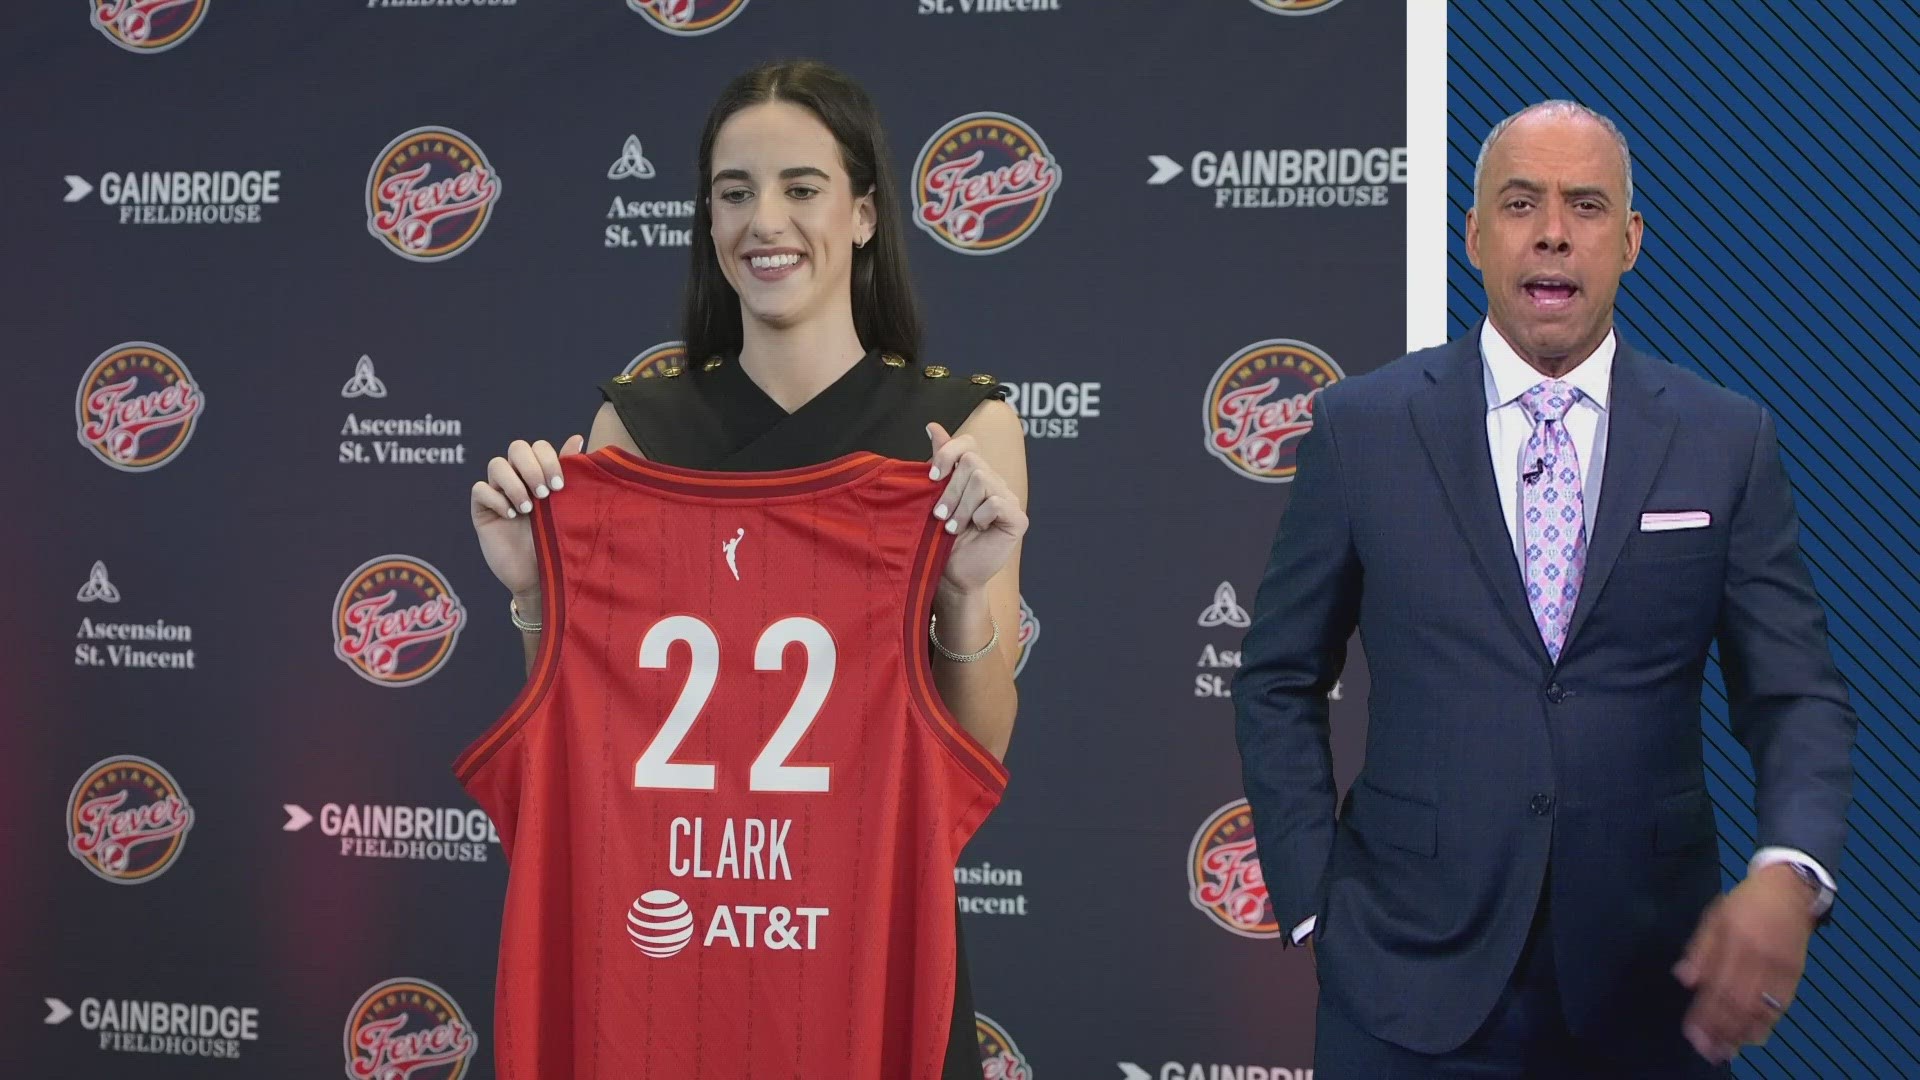 Clark will make her debut on May 3 when the Indiana Fever play the Dallas Wings.